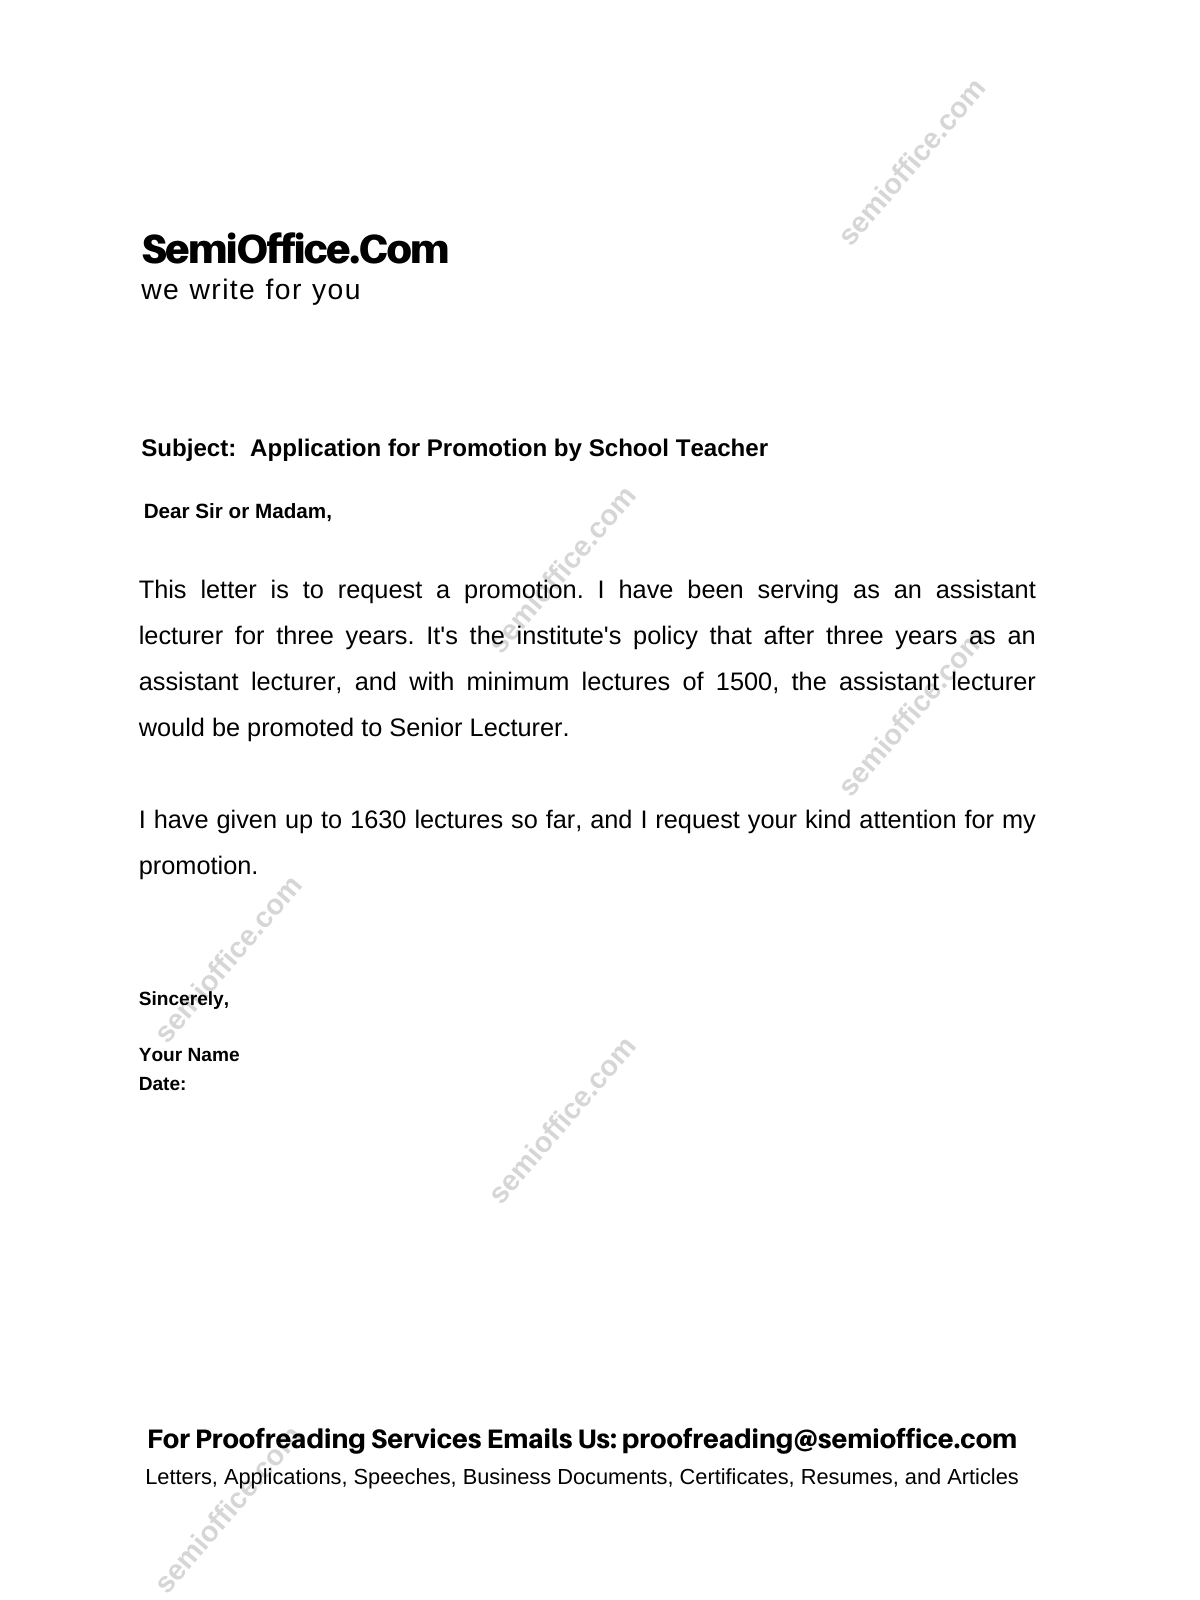 application letter for promotion in teaching